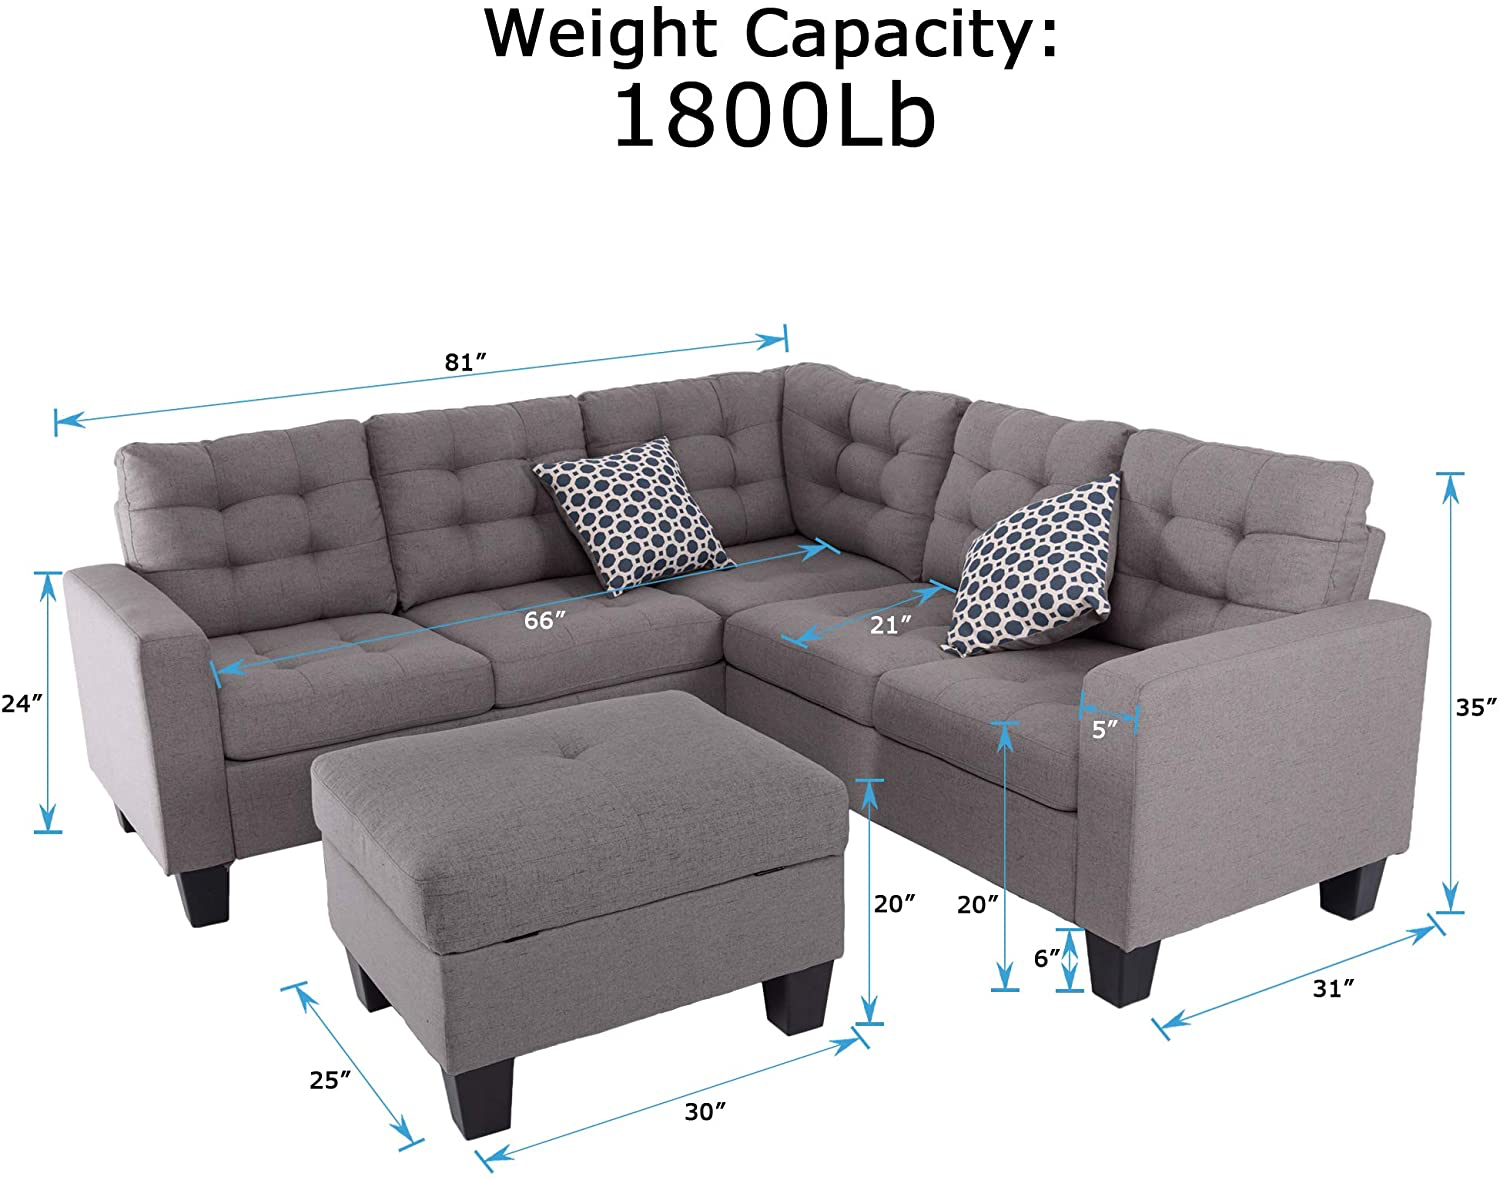 How To Measure A Sectional Sofa The, Small Sectional Sofa Measurements